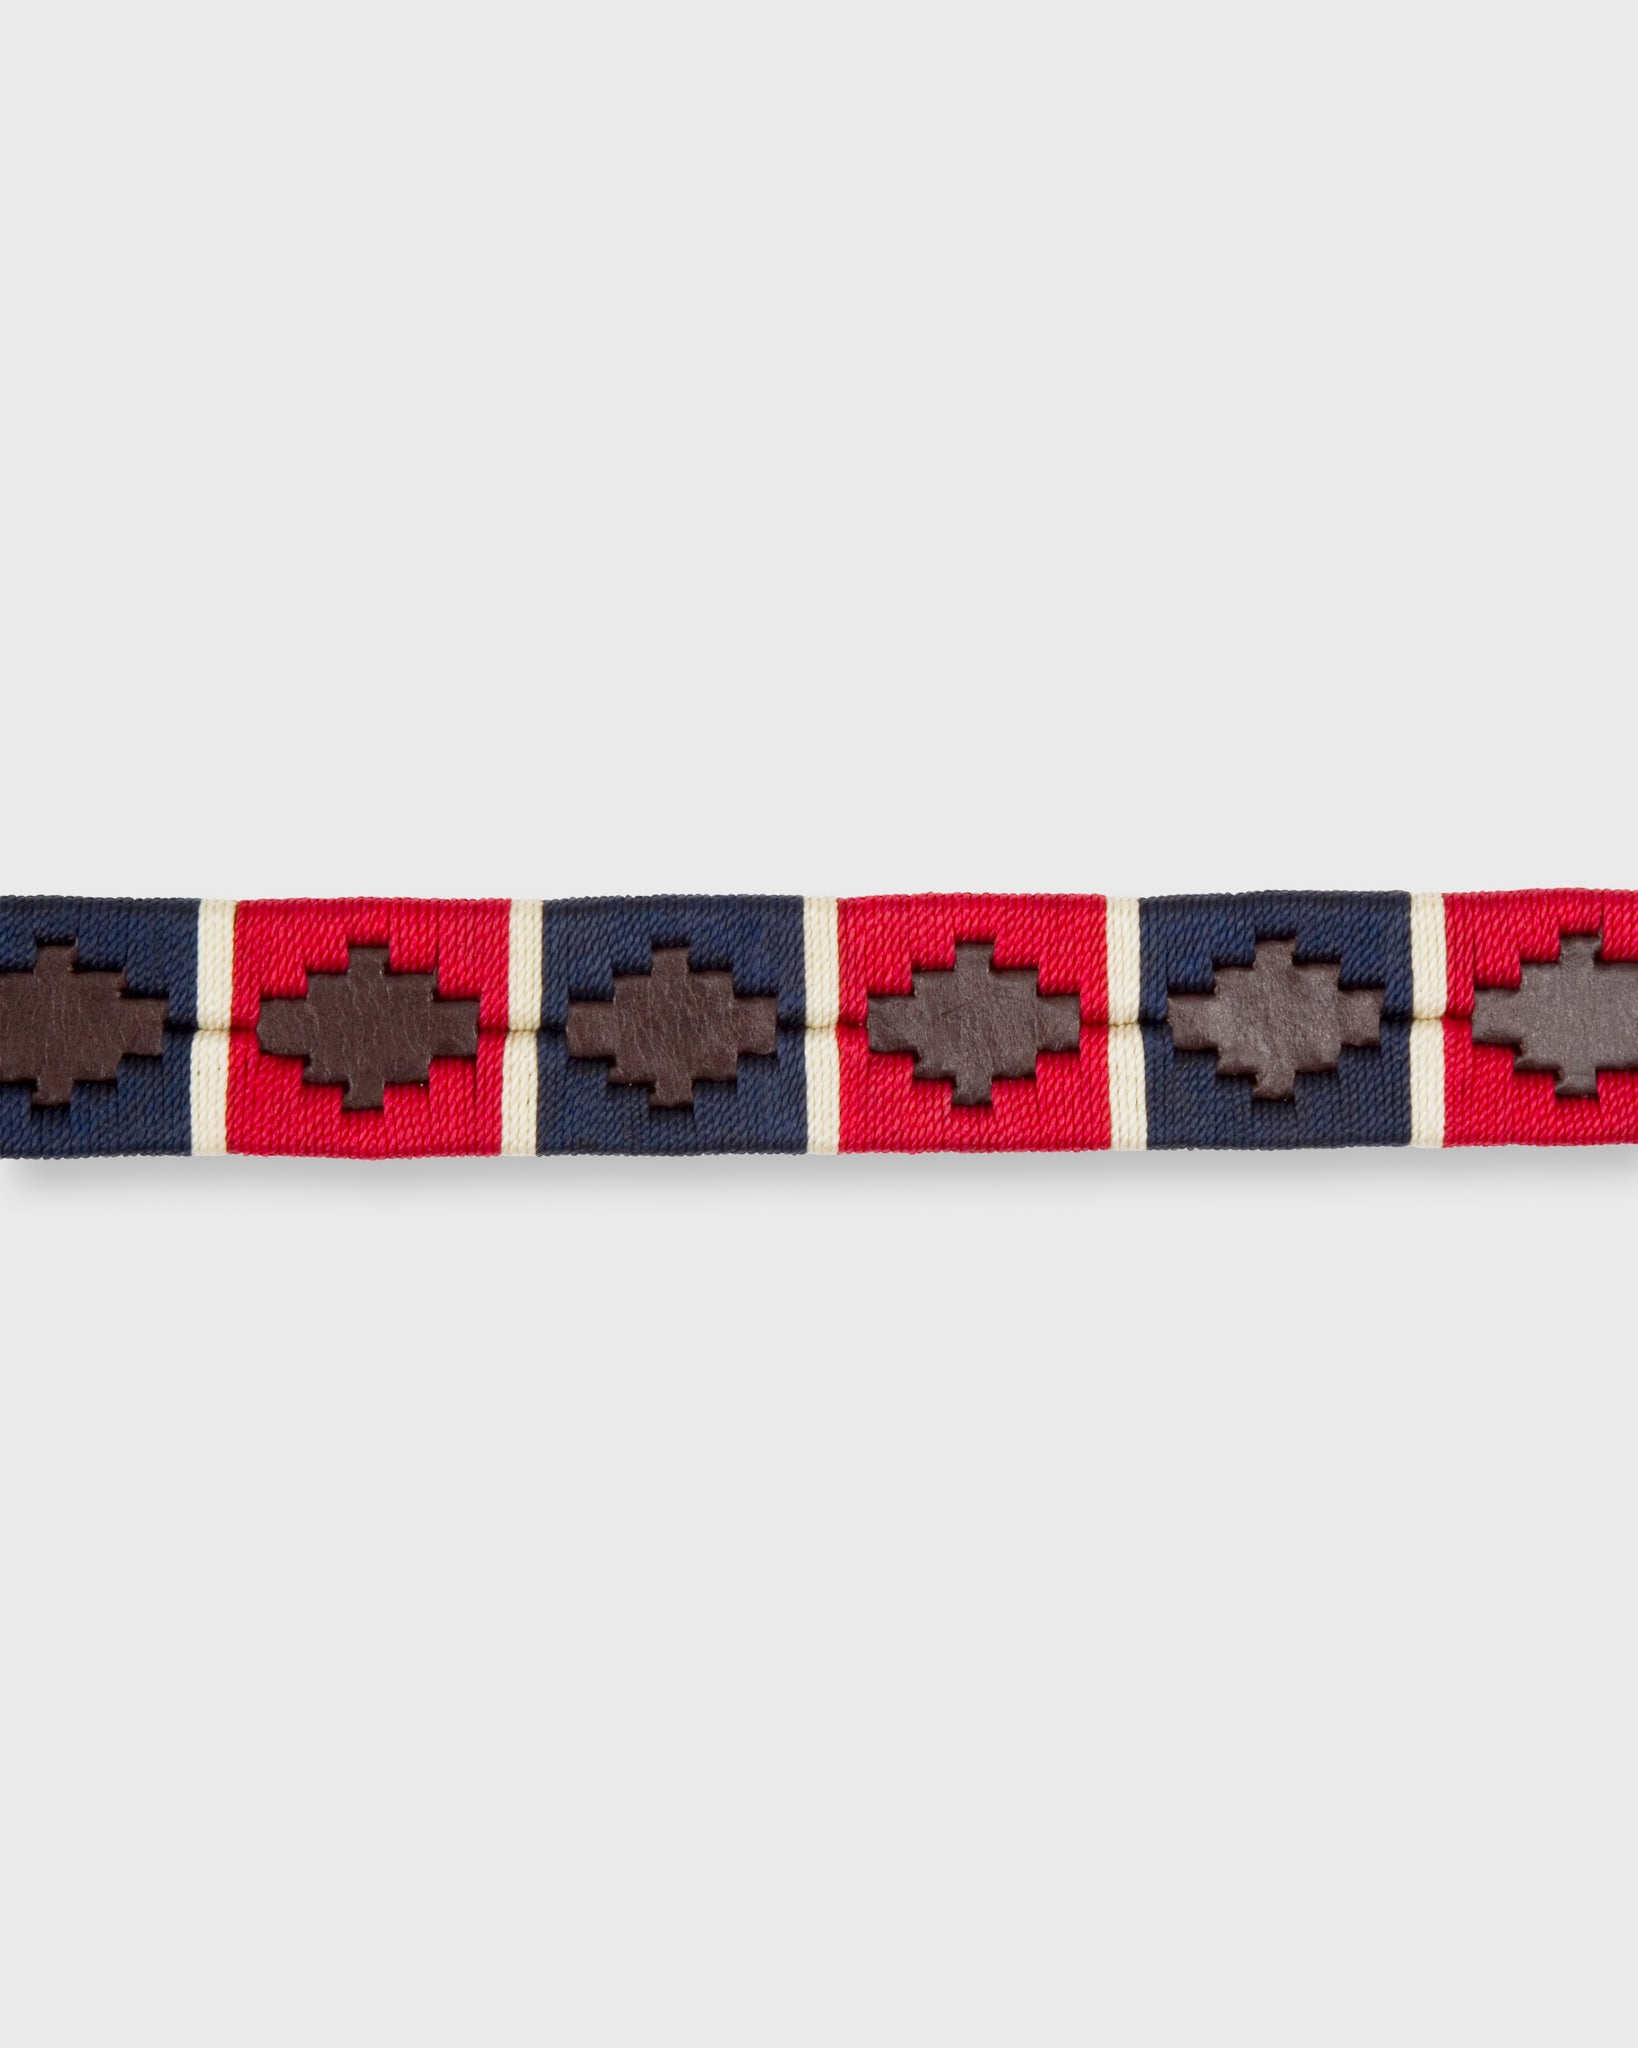 1 1/8" Polo Belt in Red/Navy/Cream Chocolate Leather